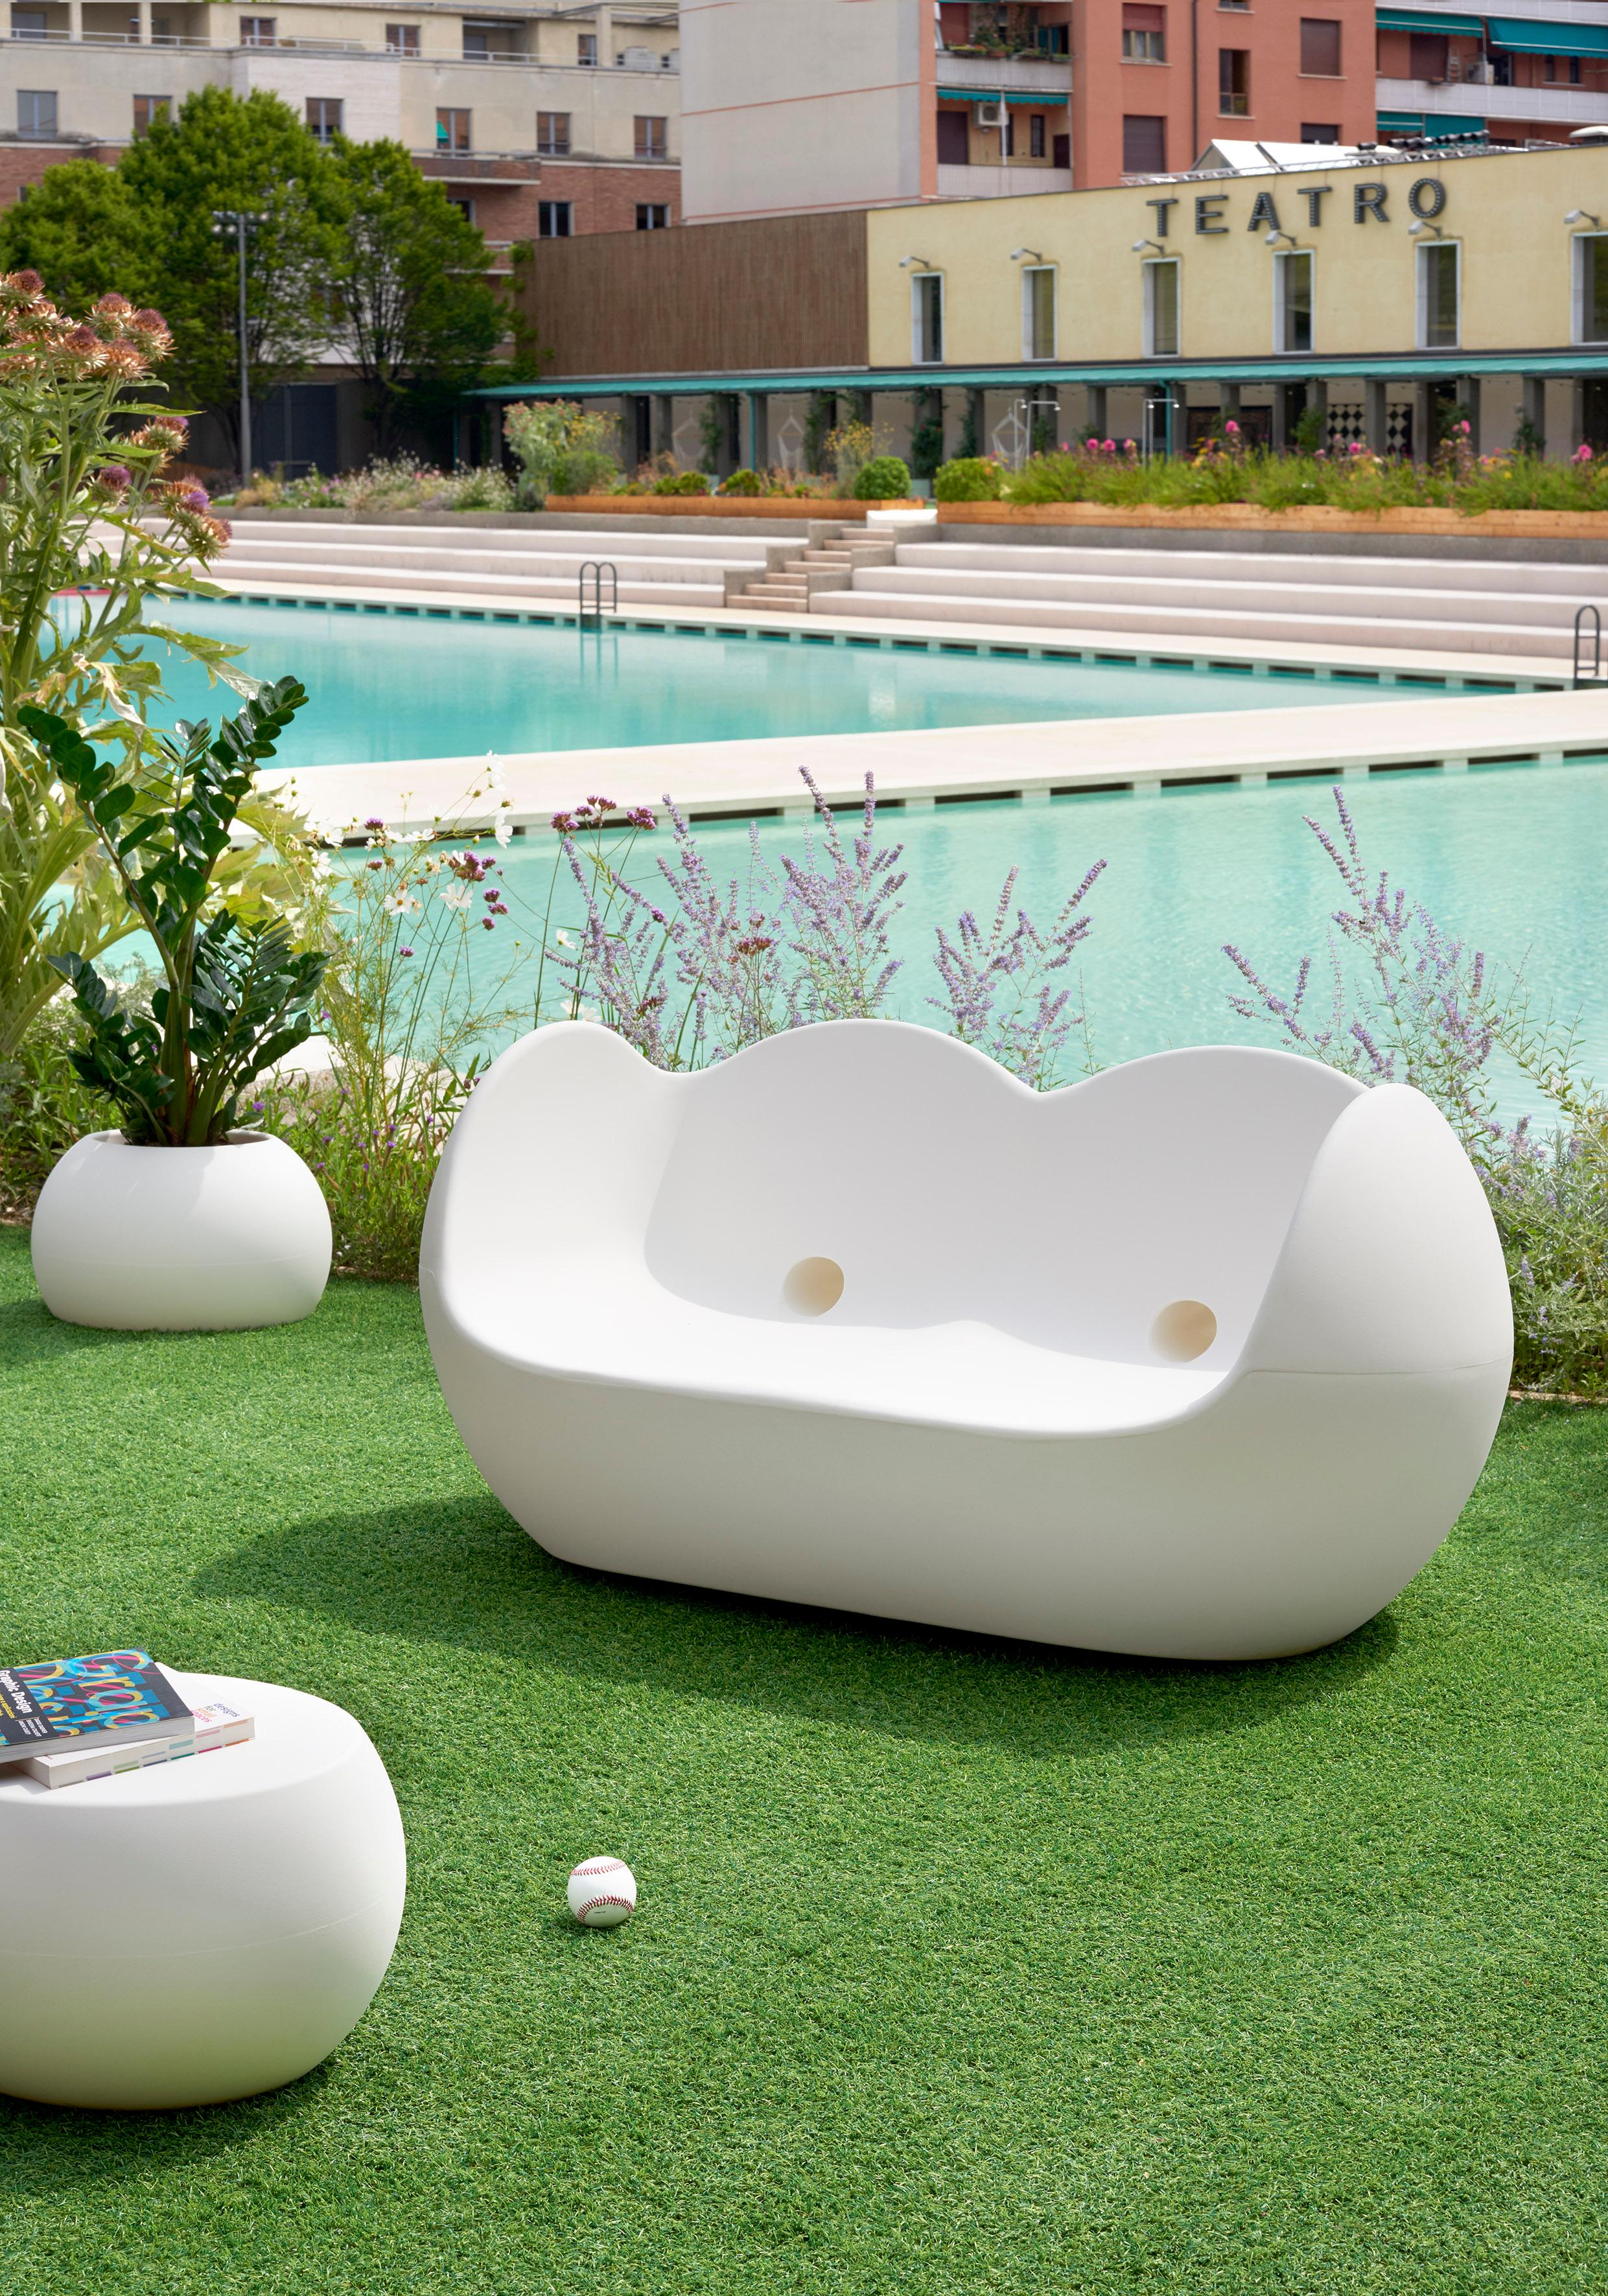 Argil Grey Blossy Rocking Sofa by Karim Rashid
Dimensions: D 85 x W 159 x H 75 cm. Seat Height: 34 cm.
Materials: Polyethylene.
Weight: 38 kg.

Available in different color options. This product is suitable for indoor and outdoor use. Please contact